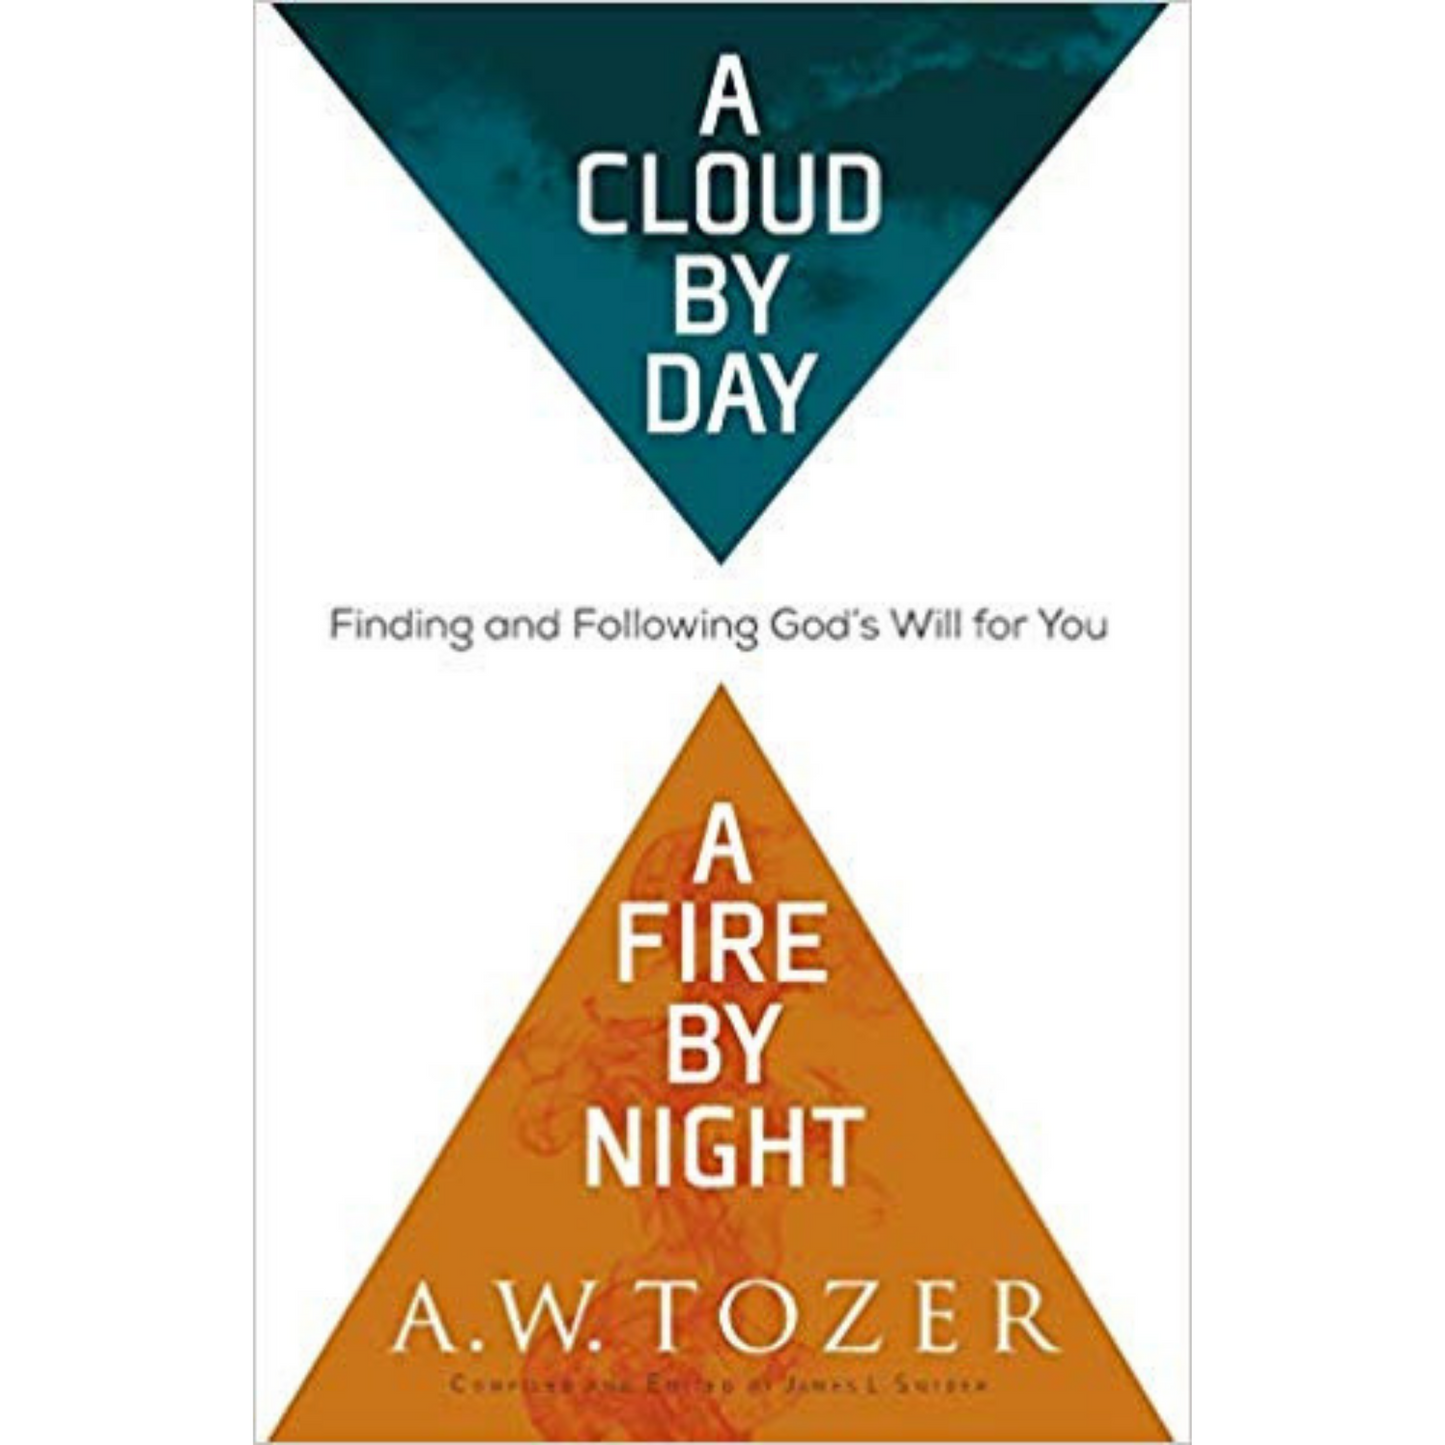 Cloud by Day, Fire by Night